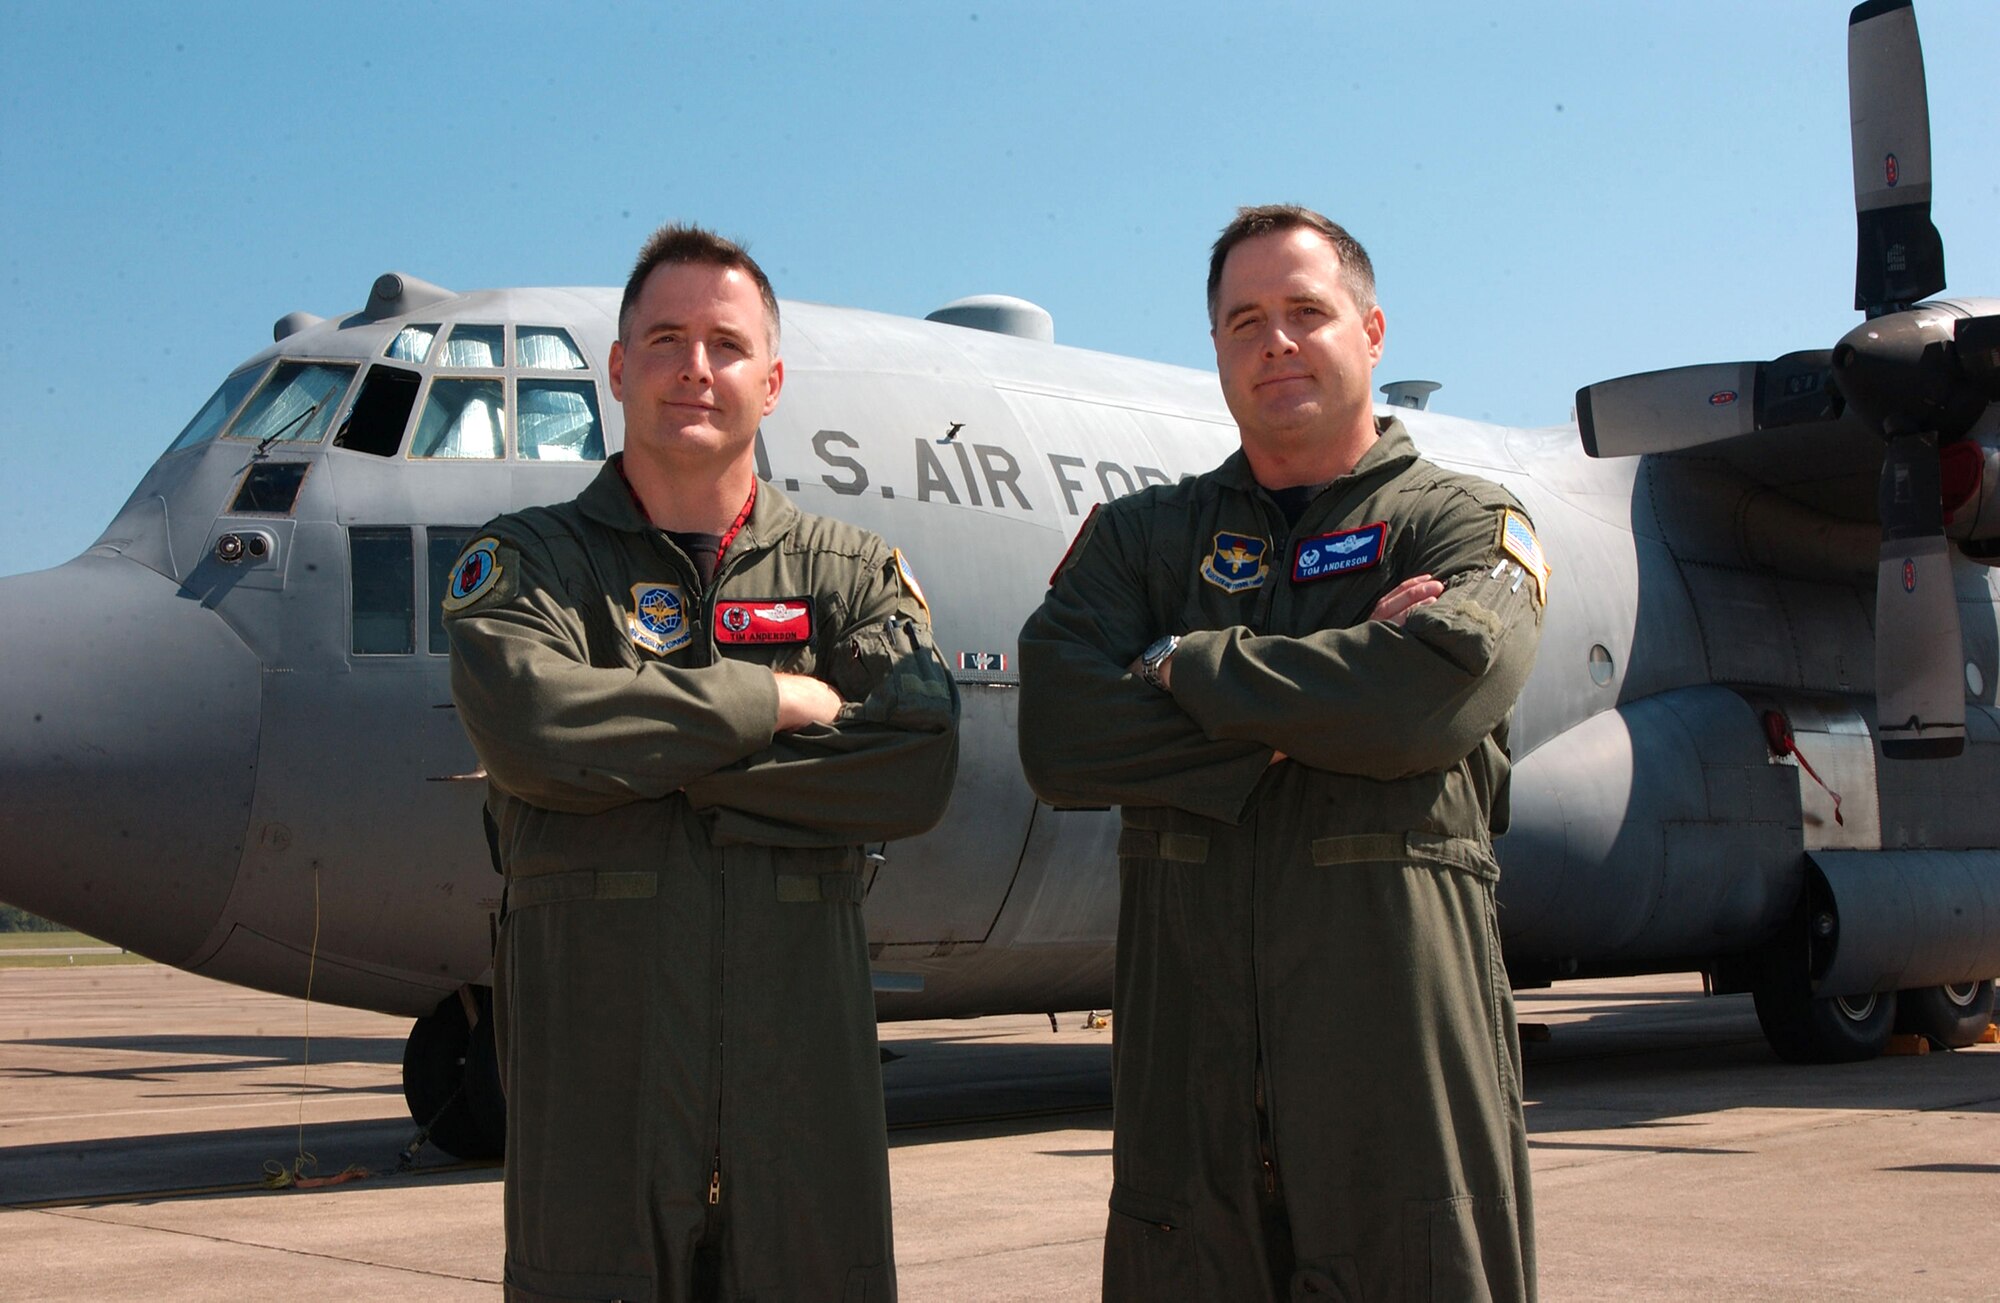 Lt. Col. Tim Anderson, left, 50th Airlift Squadron commander, and Lt. Col. Tom Anderson, 714th Training Squadron commander, are two of three active-duty Air Force brothers who are squadron commanders and lieutenant colonels at the same time. (U.S. Air Force photo by Senior Airman Eunique Stevens)